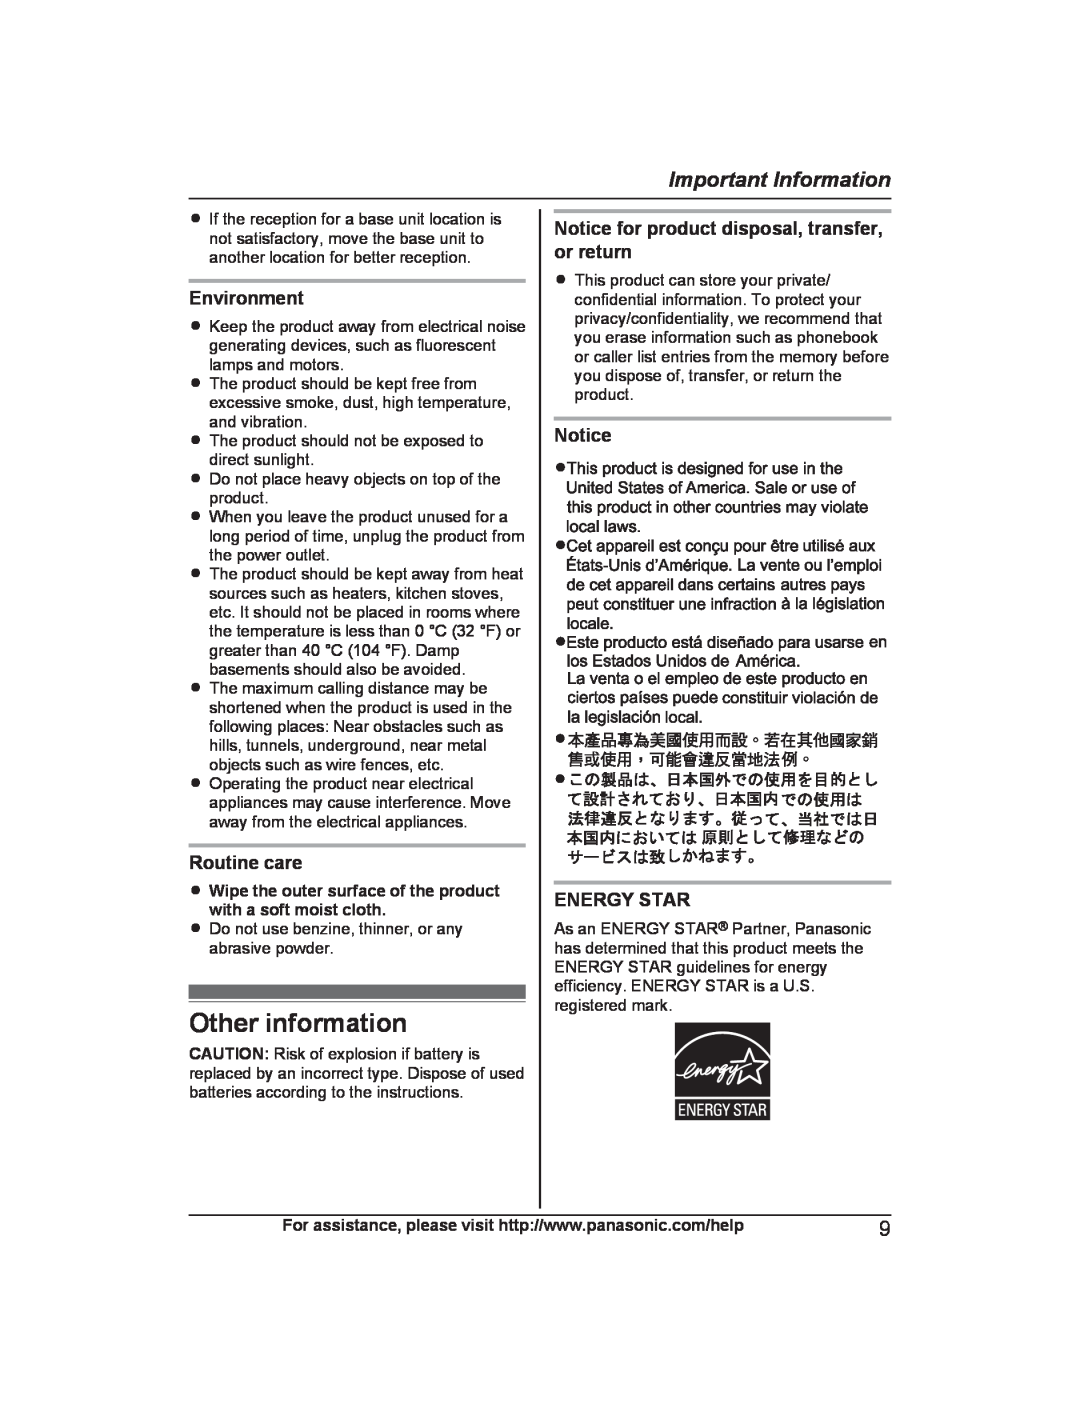 Panasonic KXTG4734B Other information, Environment, Routine care, Notice for product disposal, transfer, or return 